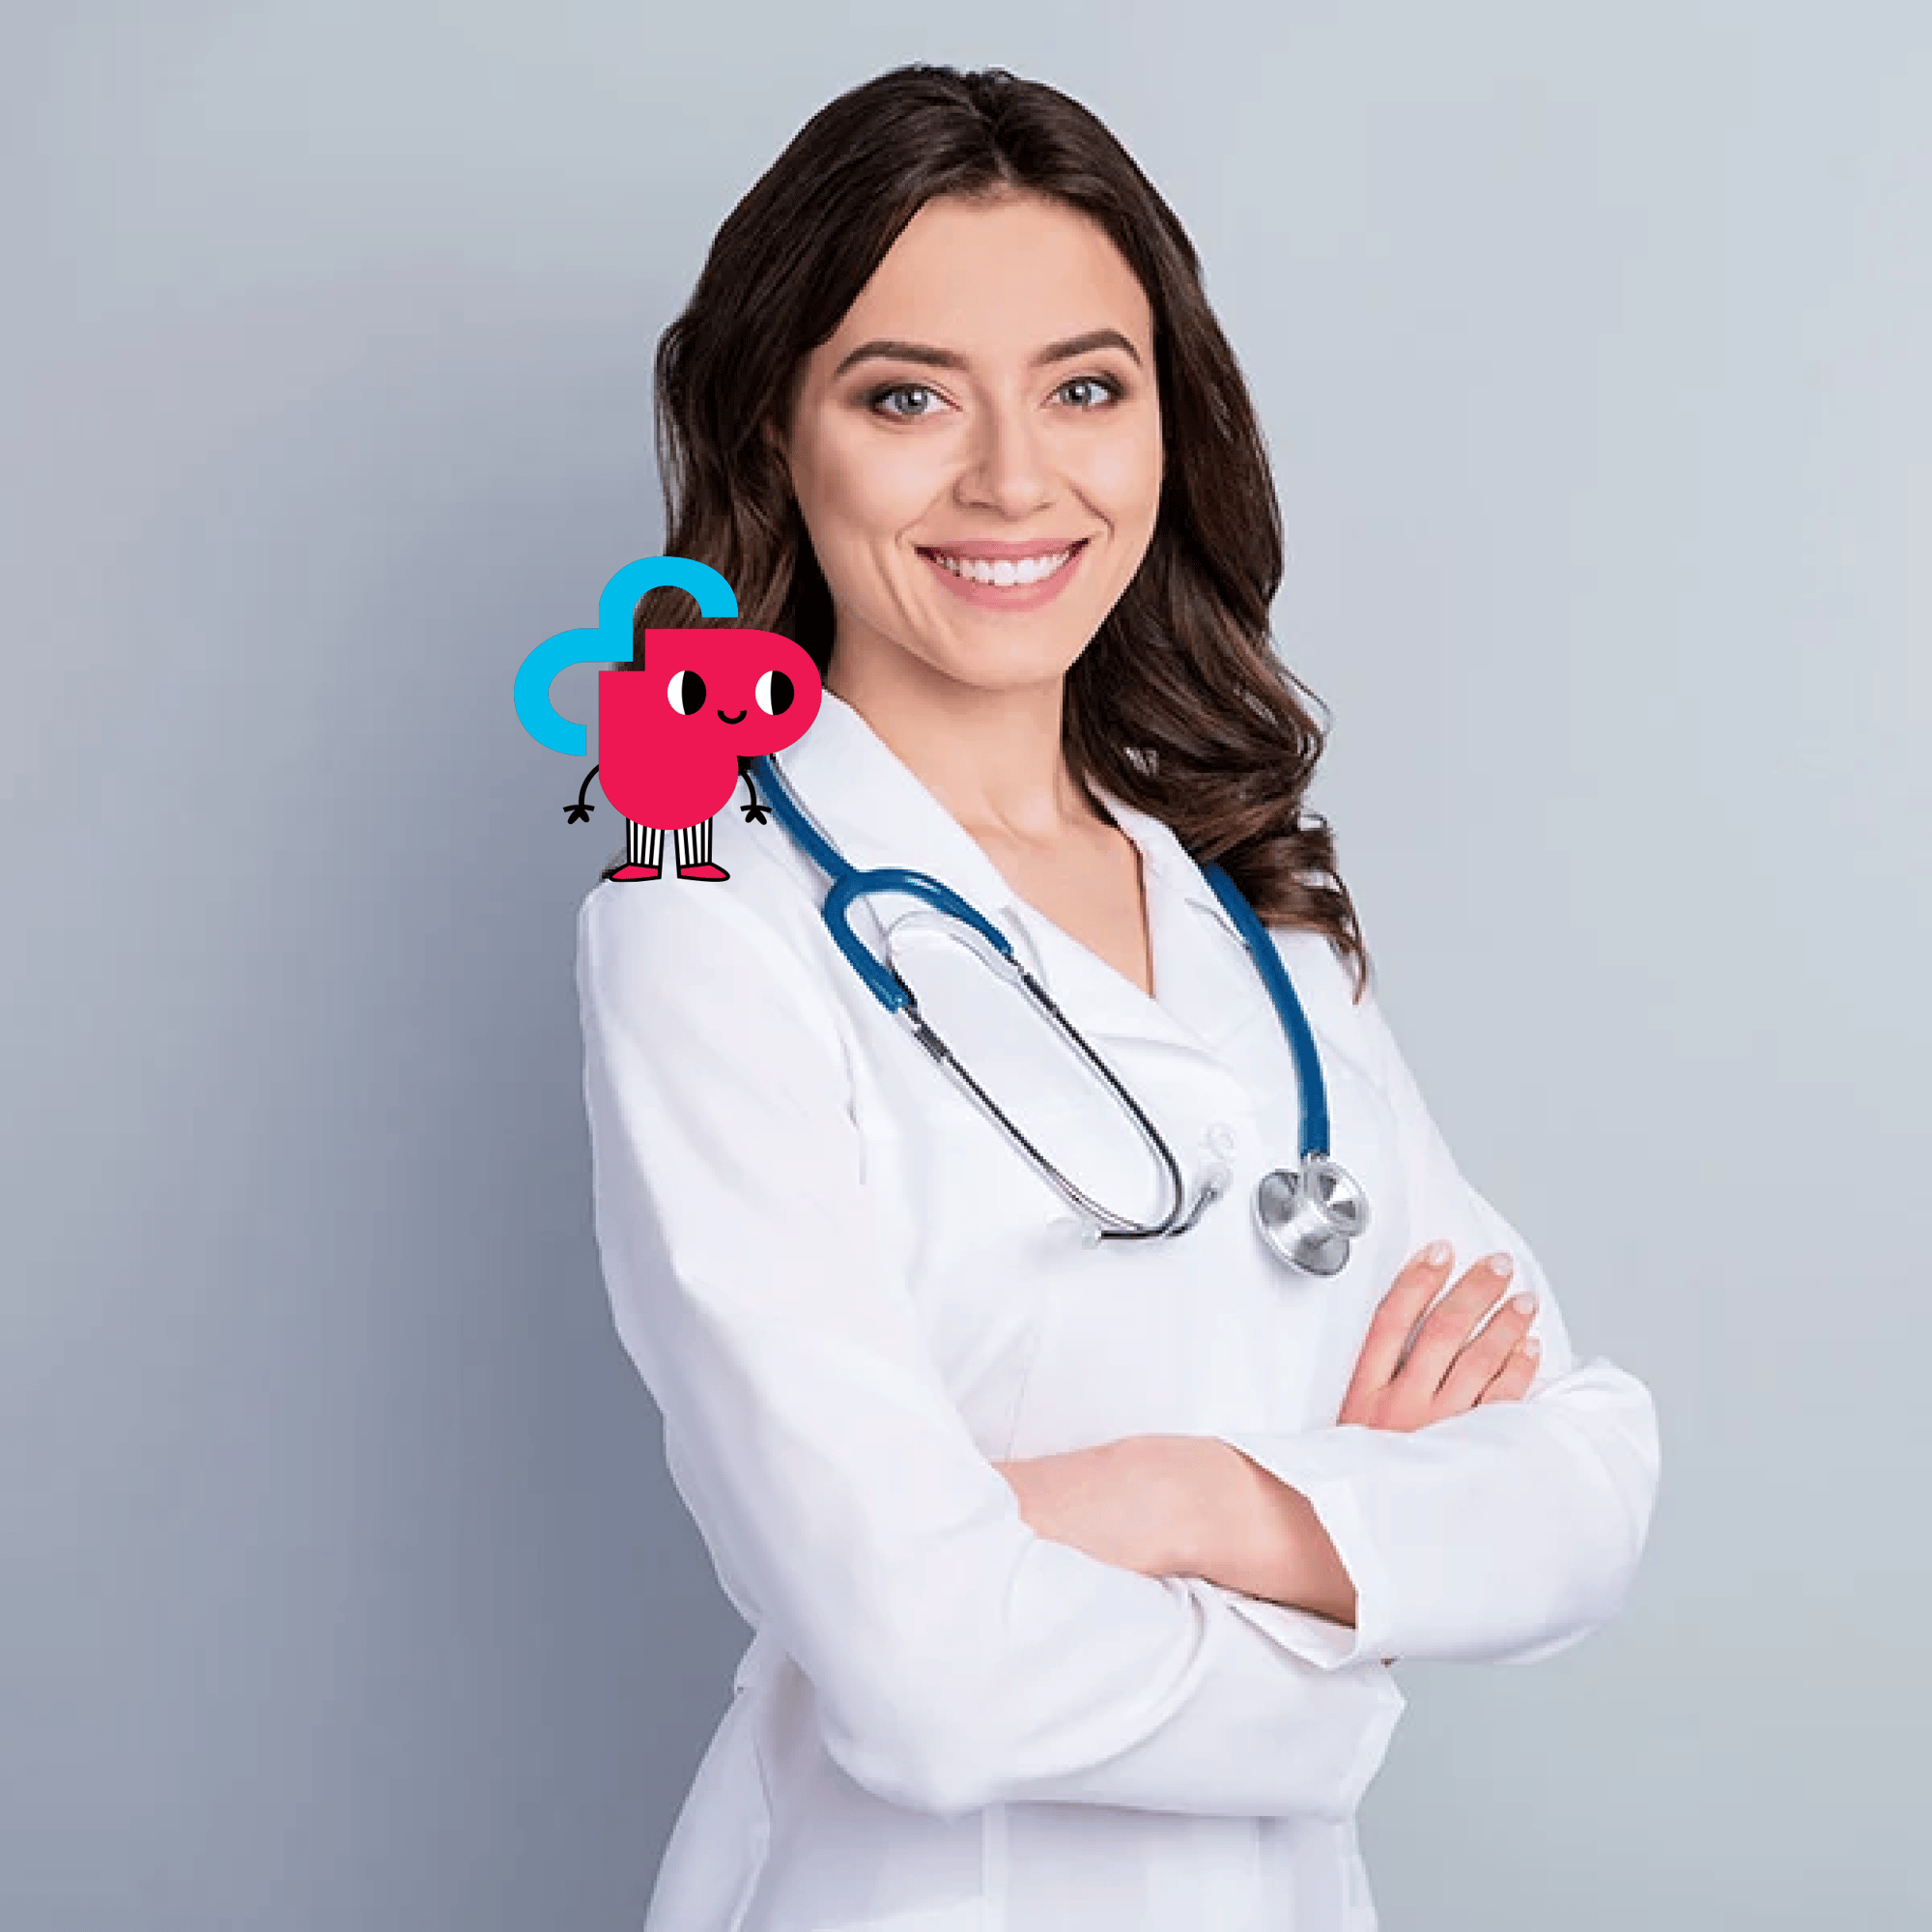 Smiling female doctor with CARIE on her shoulder.